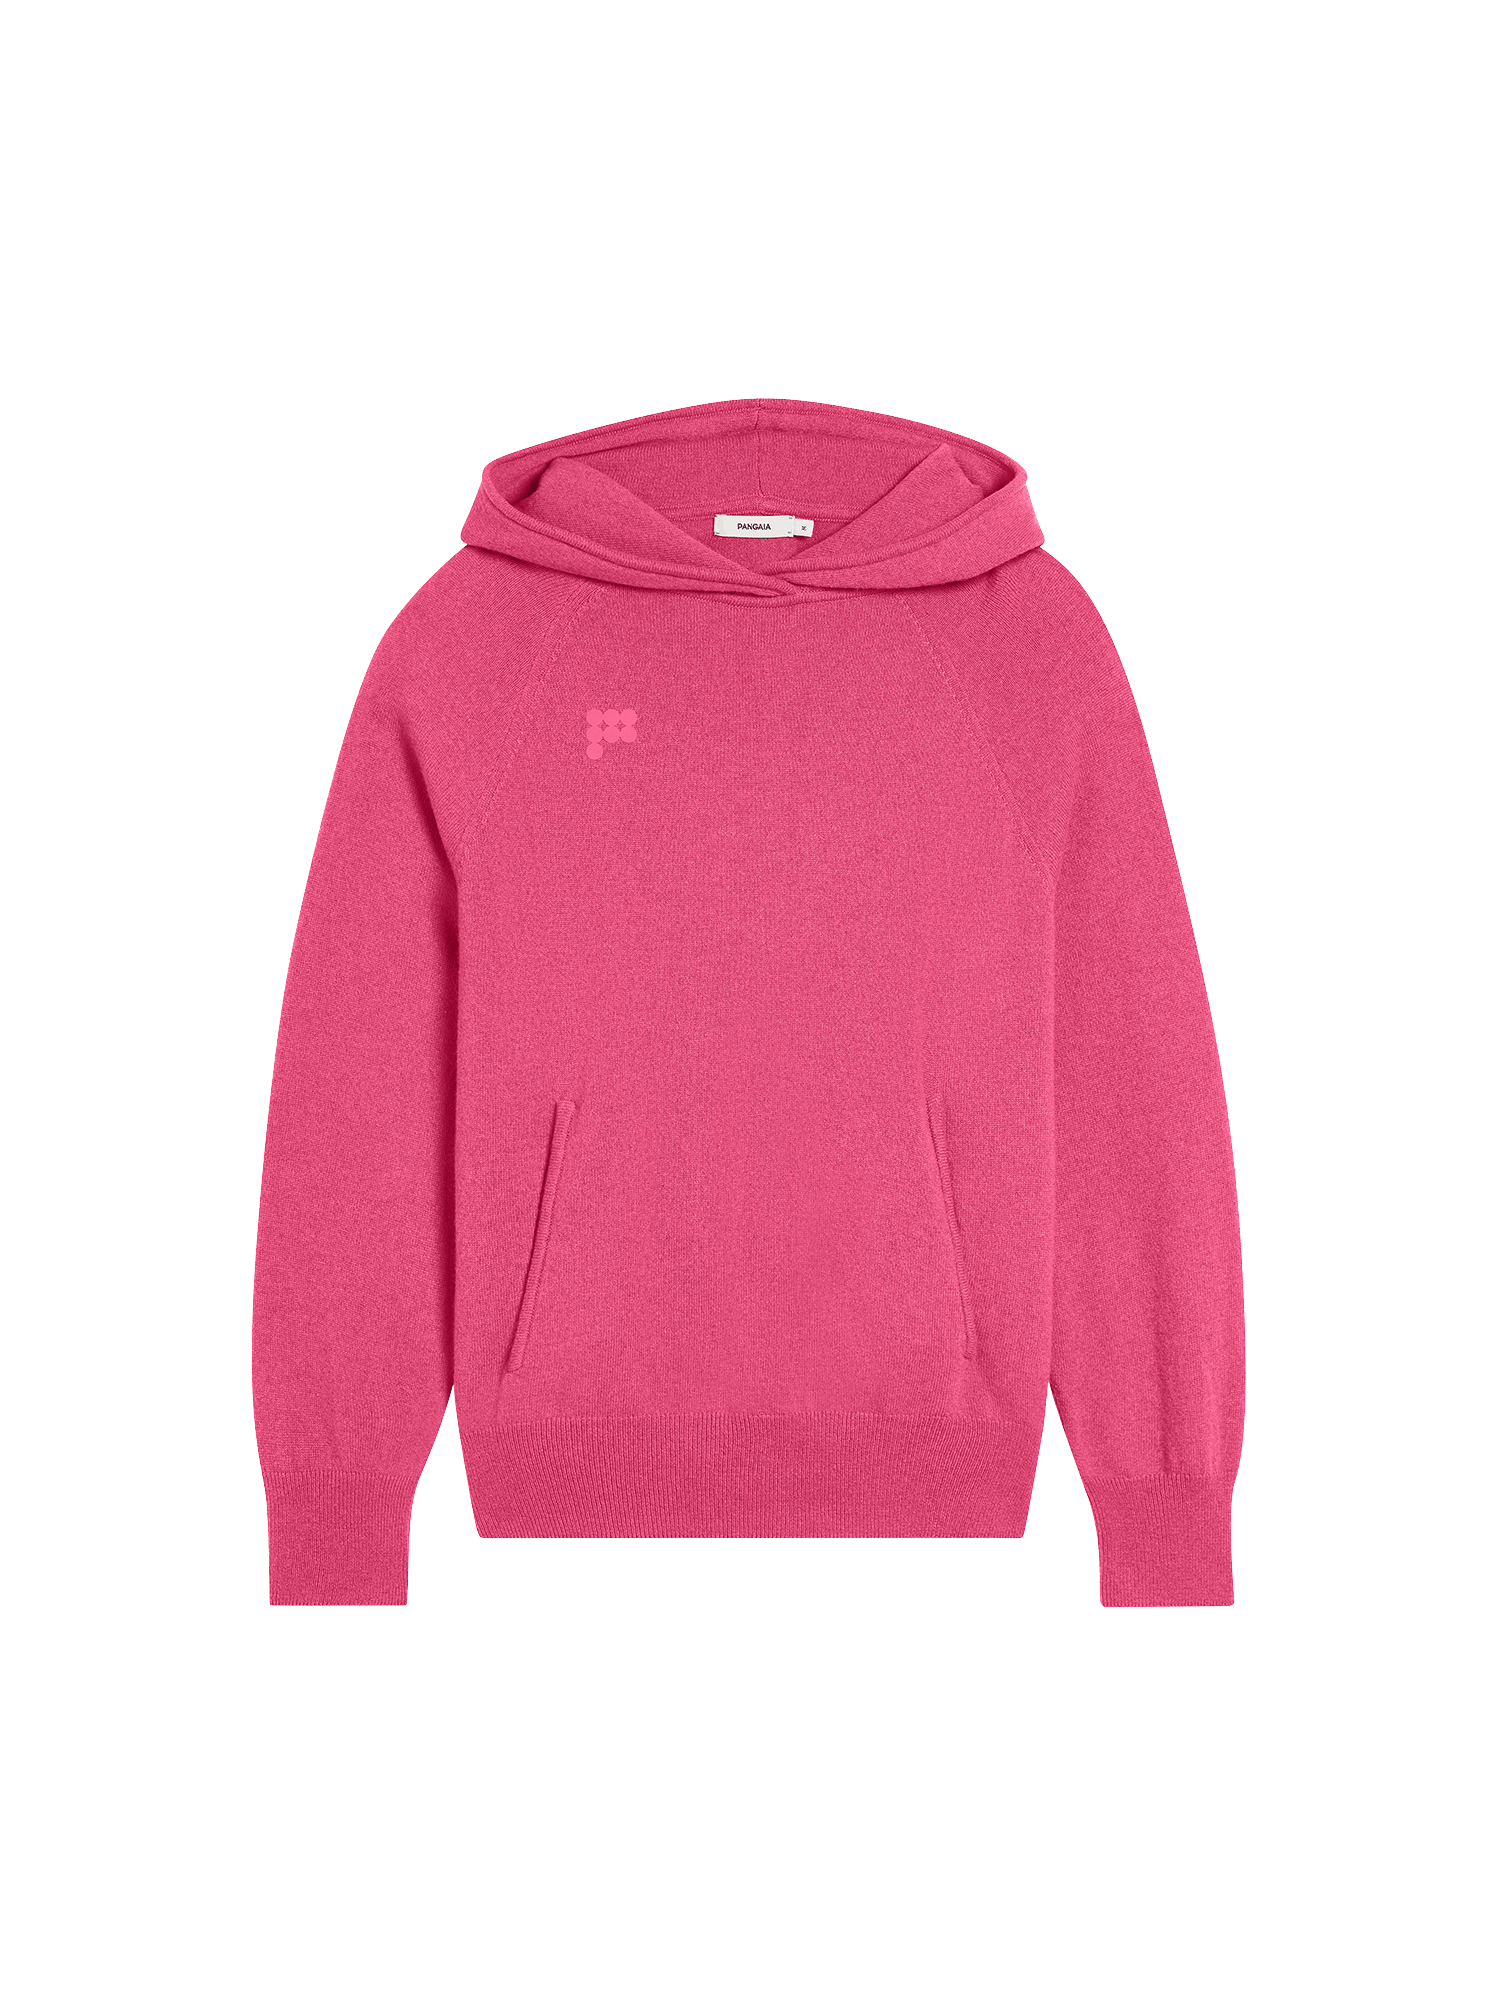 https://storage.googleapis.com/download/storage/v1/b/whering.appspot.com/o/marketplace_product_images%2Fpangaia-archive-womens-recycled-cashmere-hoodieflamingo-pink-magenta-fcRUUzB7XtQcRYXnJ6iKG4.png?generation=1691816454201282&alt=media